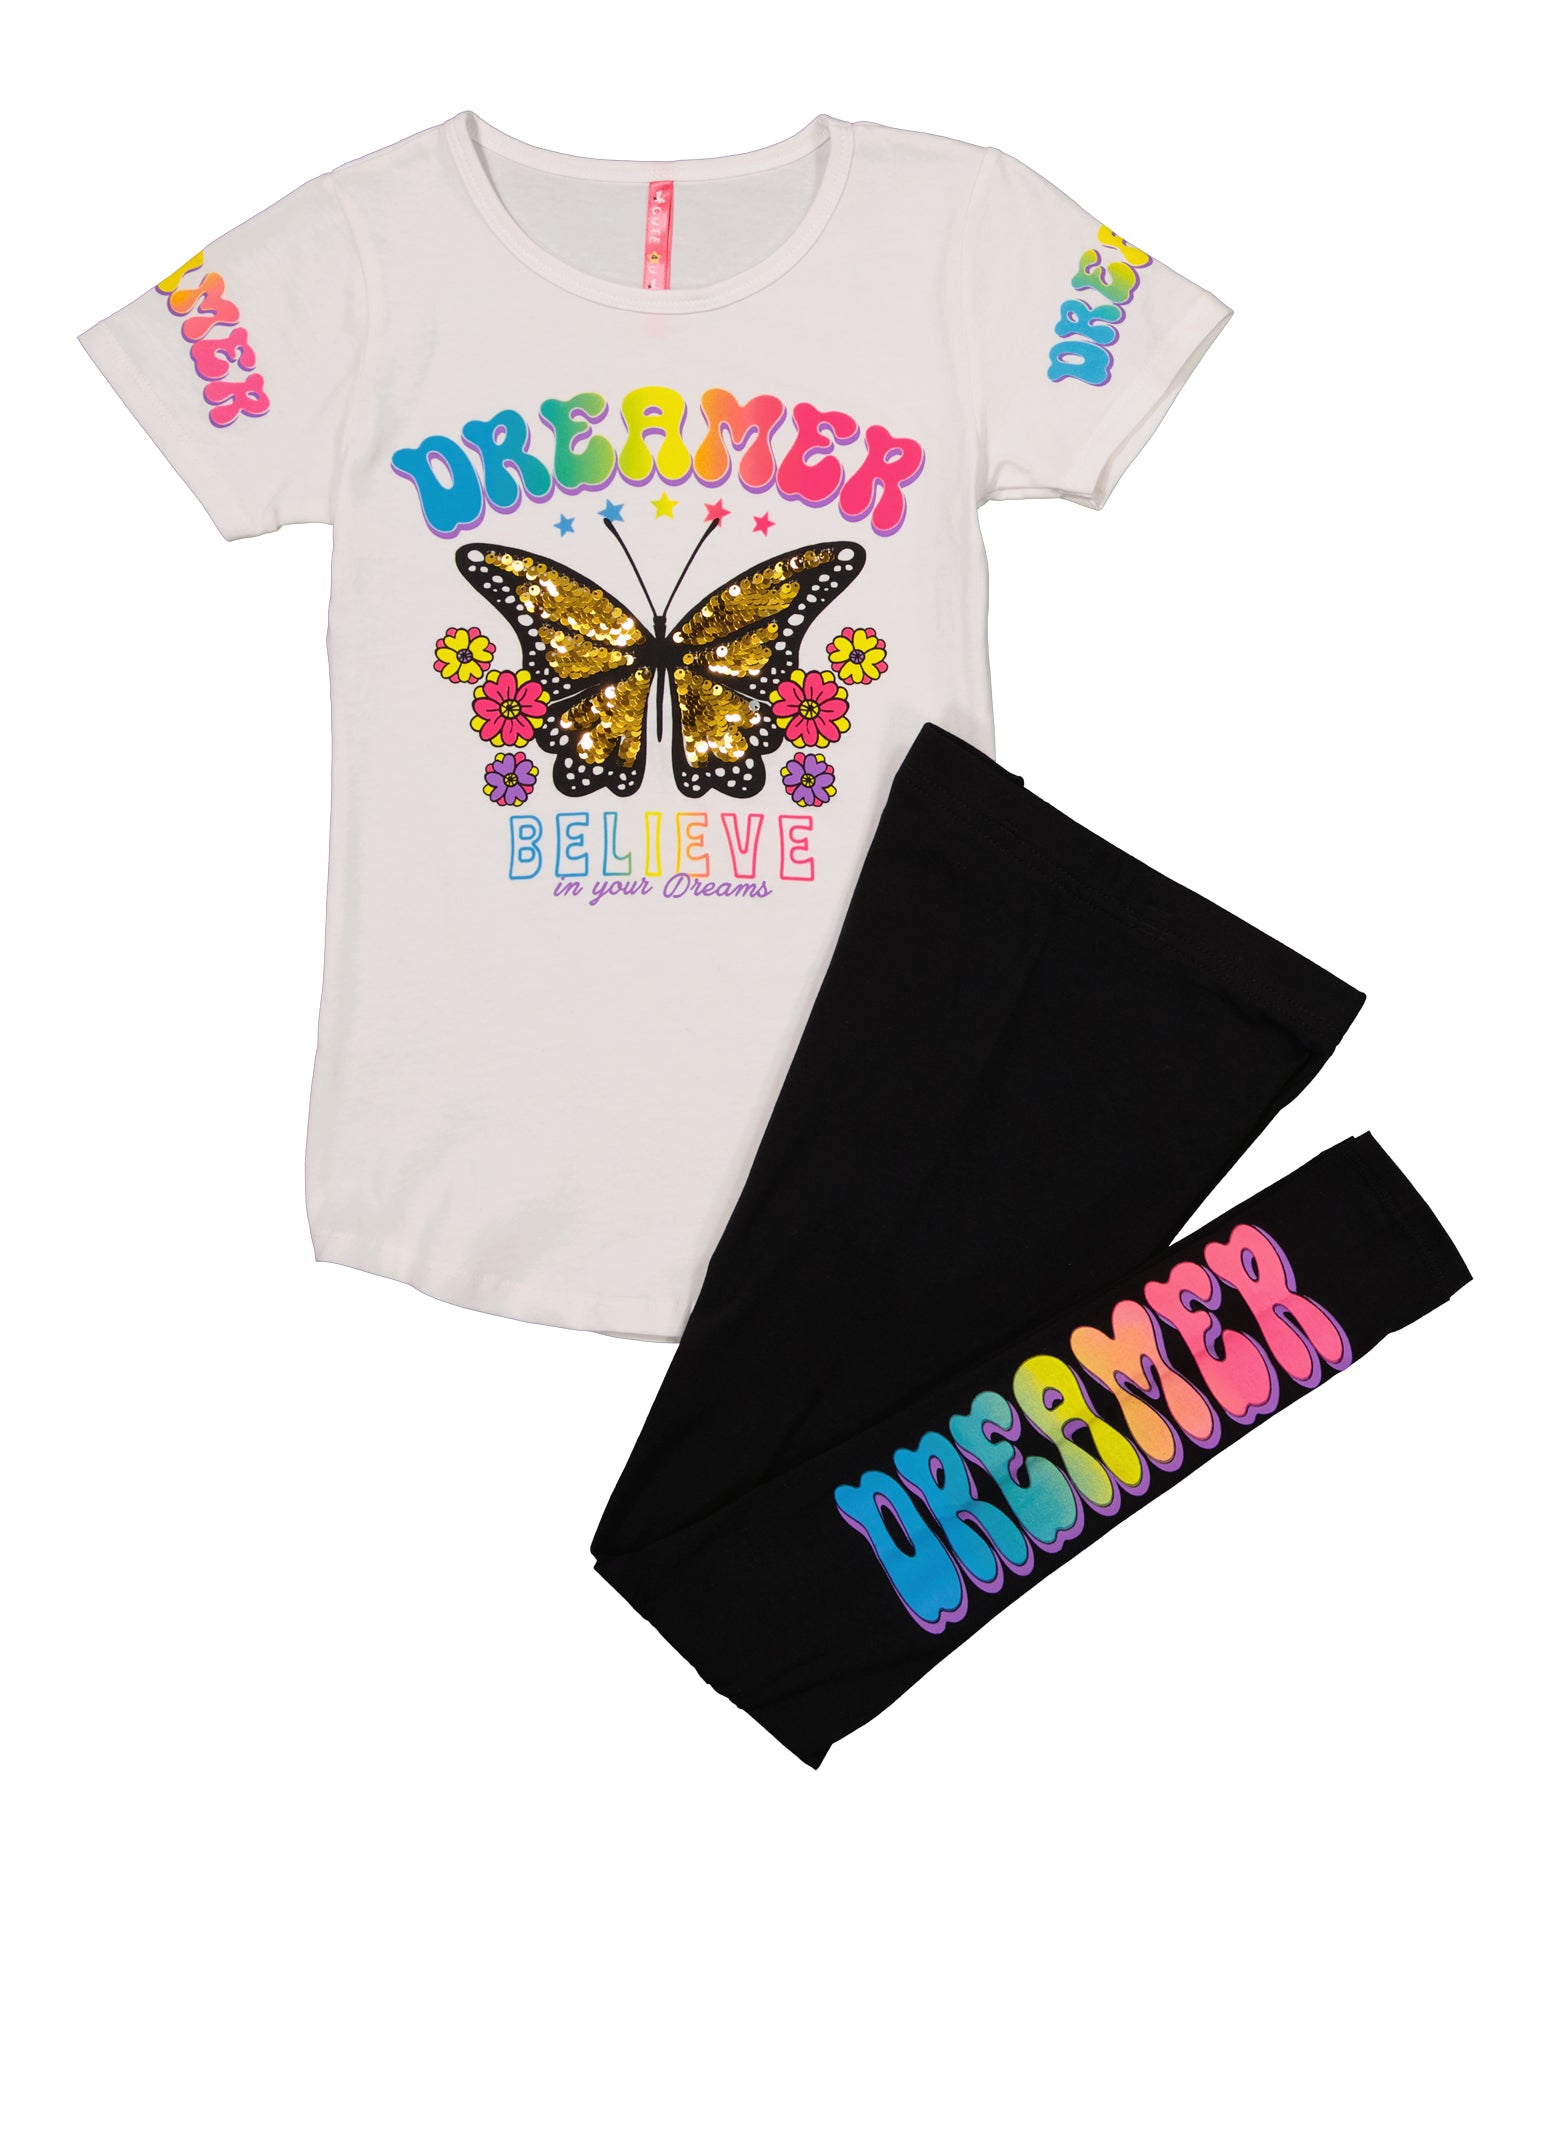 Girls Reversible Sequin Butterfly Graphic Tee and Leggings, Multi, Size 7-8